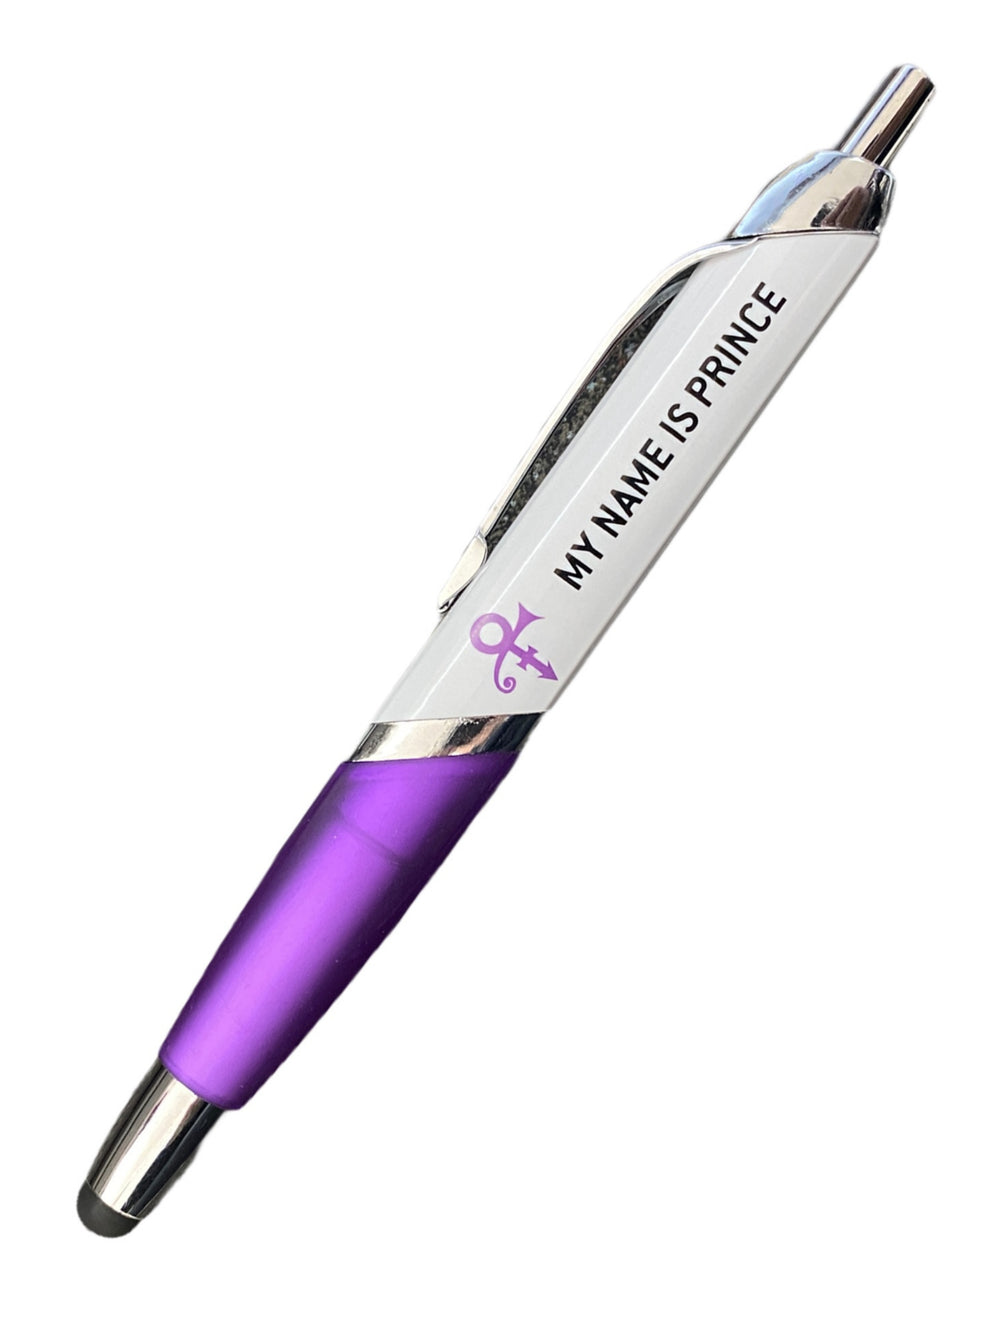 Prince – My Name Is Exhibition Official Pen